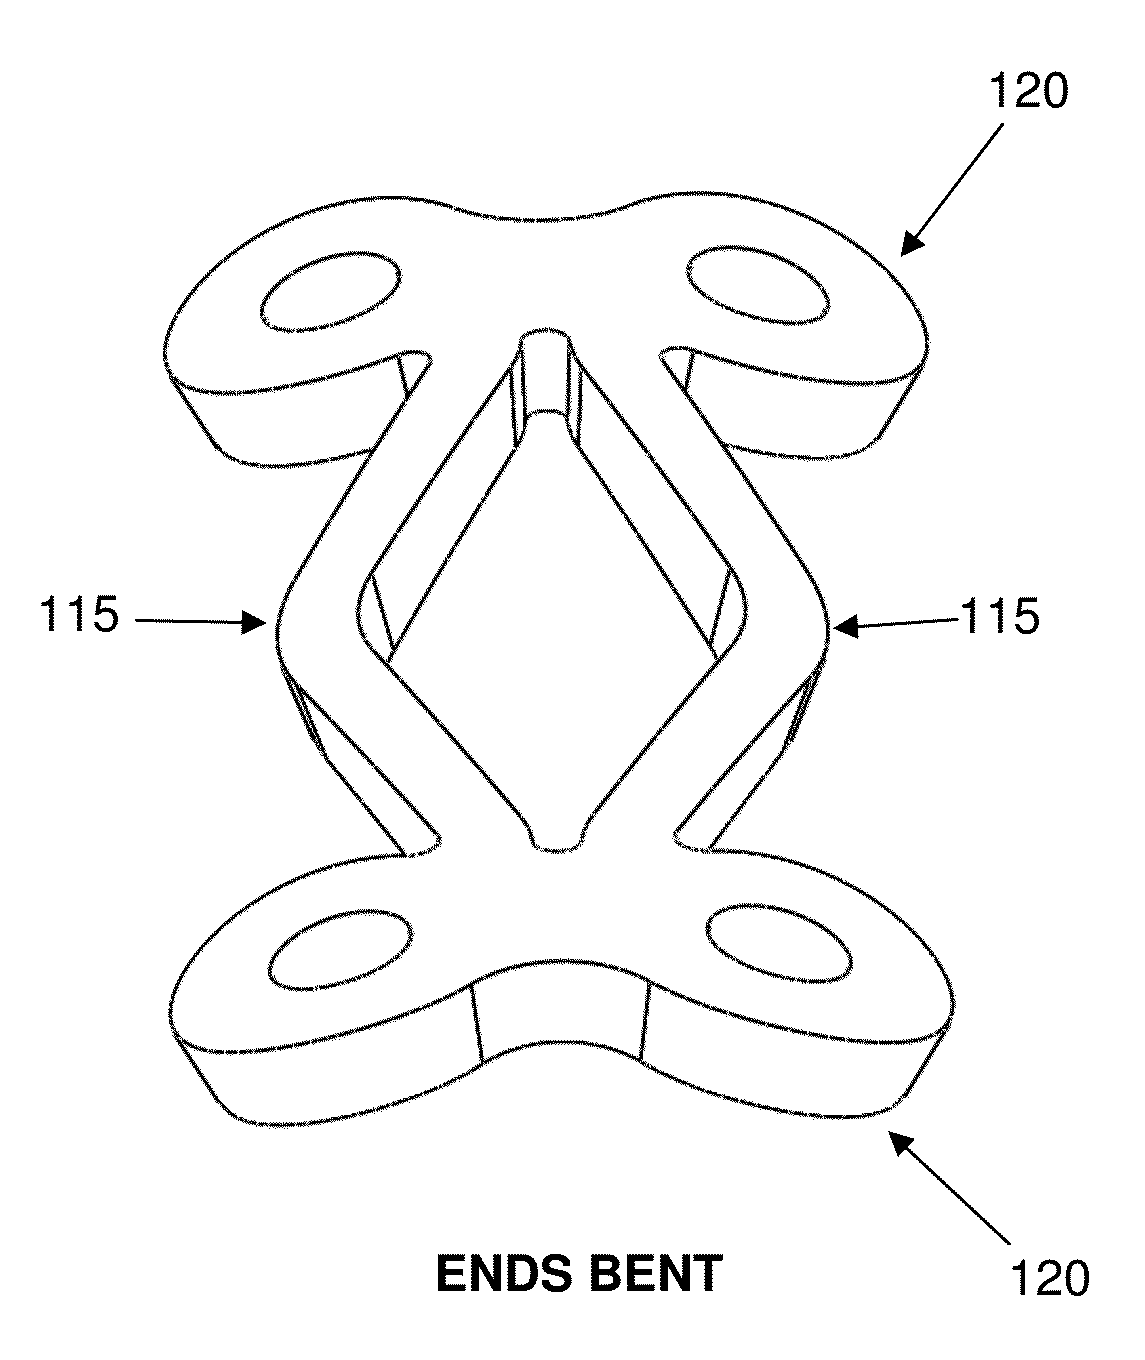 Controlling the unloading stress of nitinol devices and/or other shape memory material devices